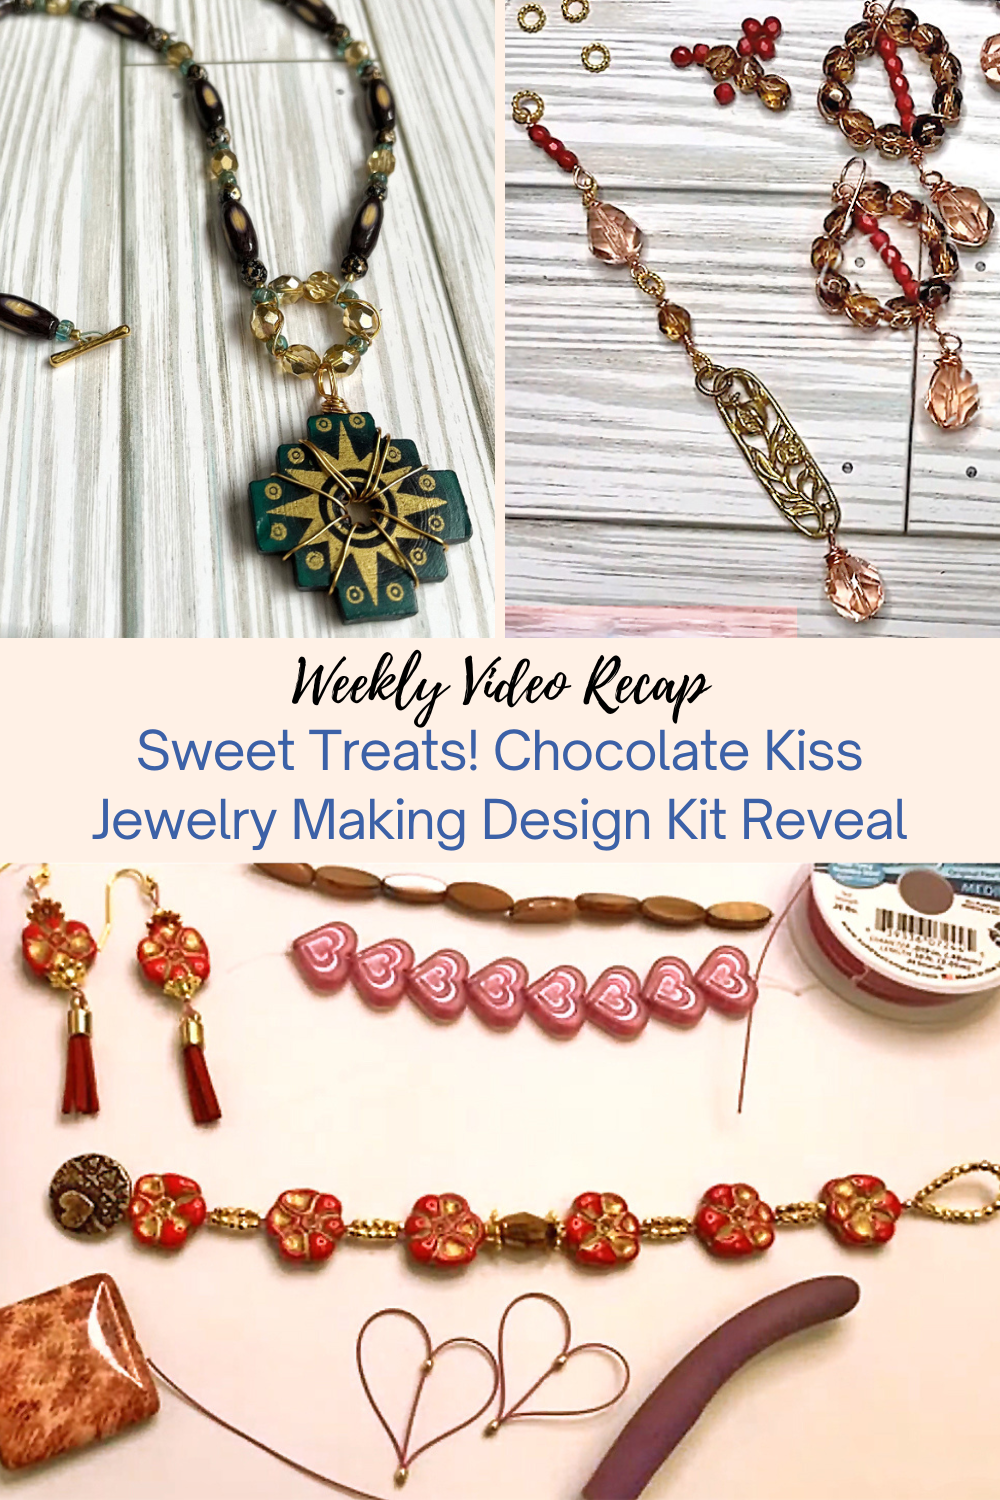 Sweet Treats! Chocolate Kiss Jewelry Making Design Kit Reveal Collage